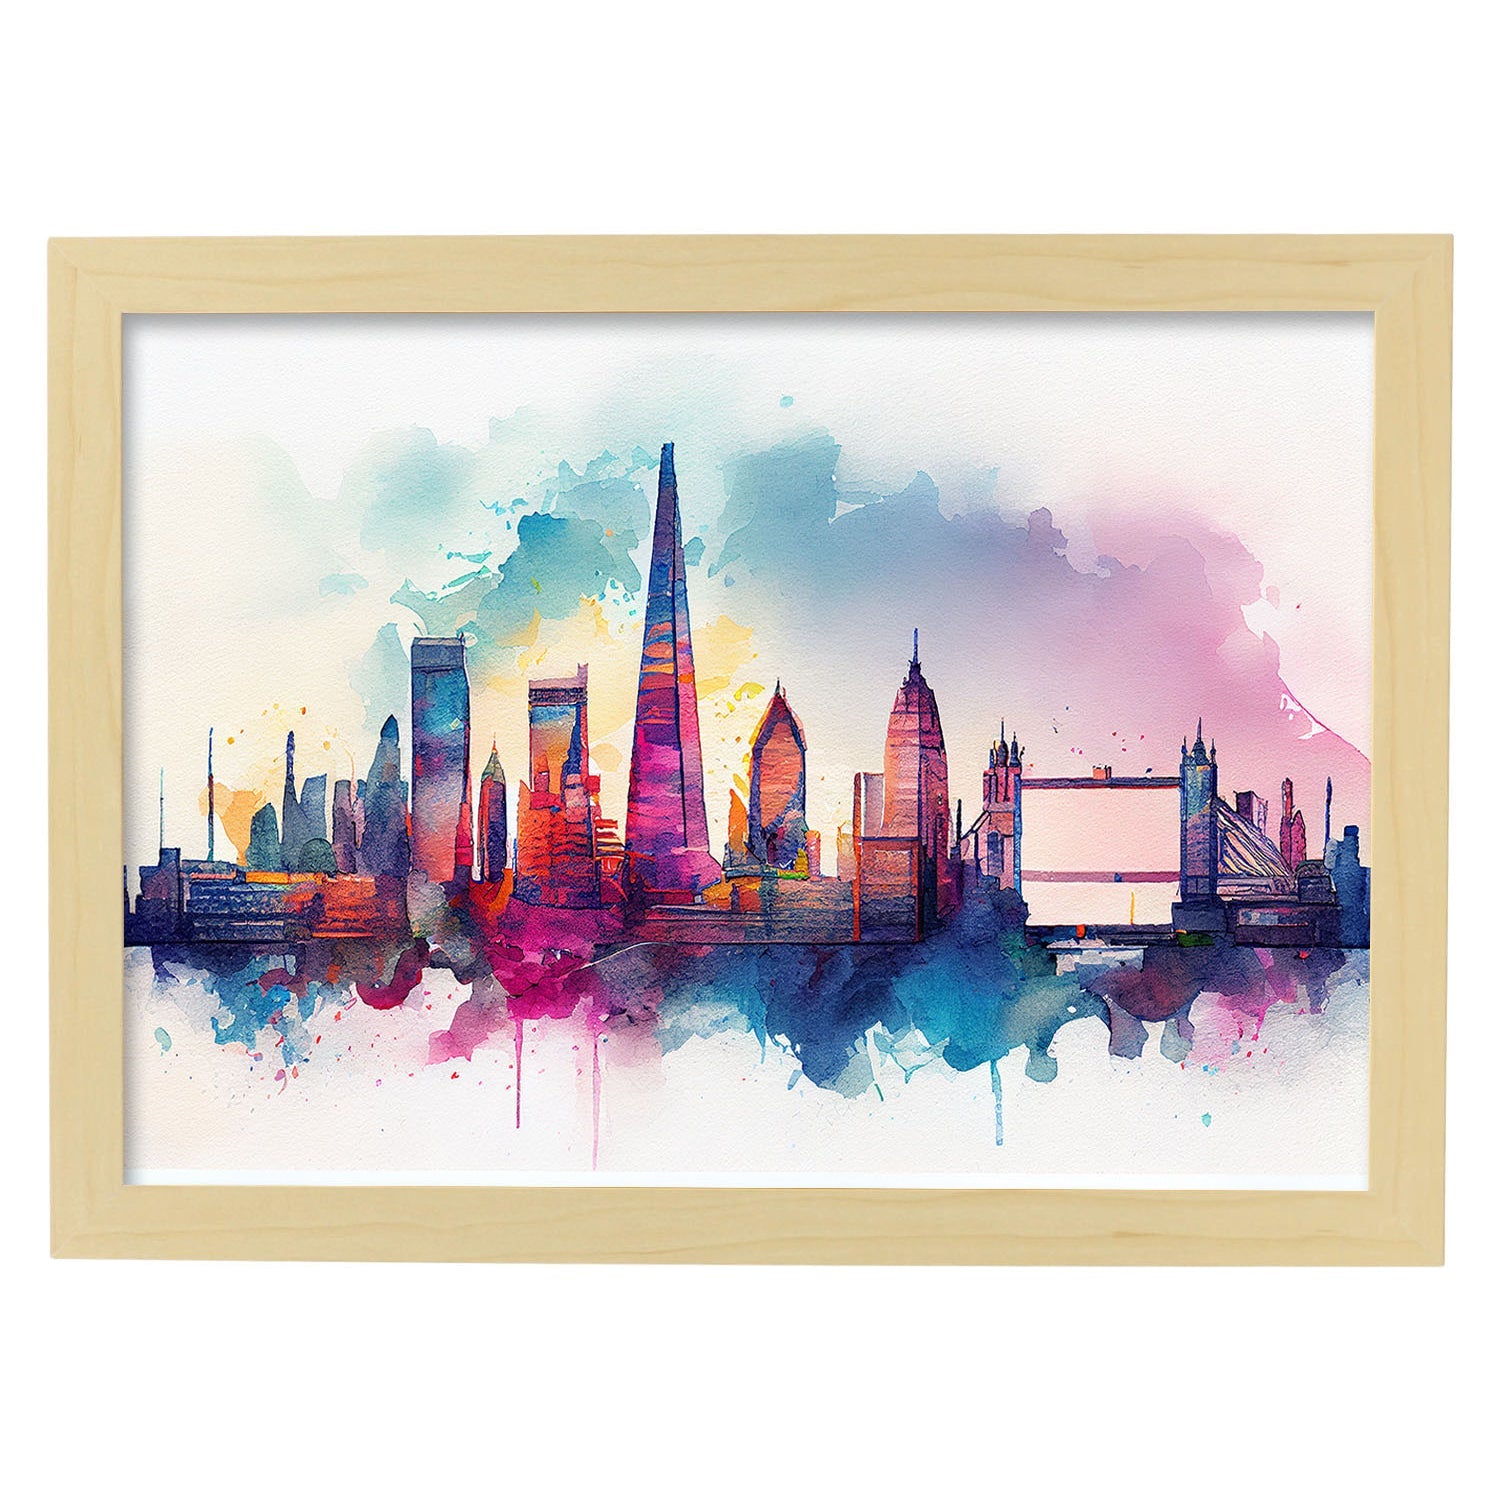 Nacnic watercolor of a skyline of the city of London_2. Aesthetic Wall Art Prints for Bedroom or Living Room Design.-Artwork-Nacnic-A4-Marco Madera Clara-Nacnic Estudio SL